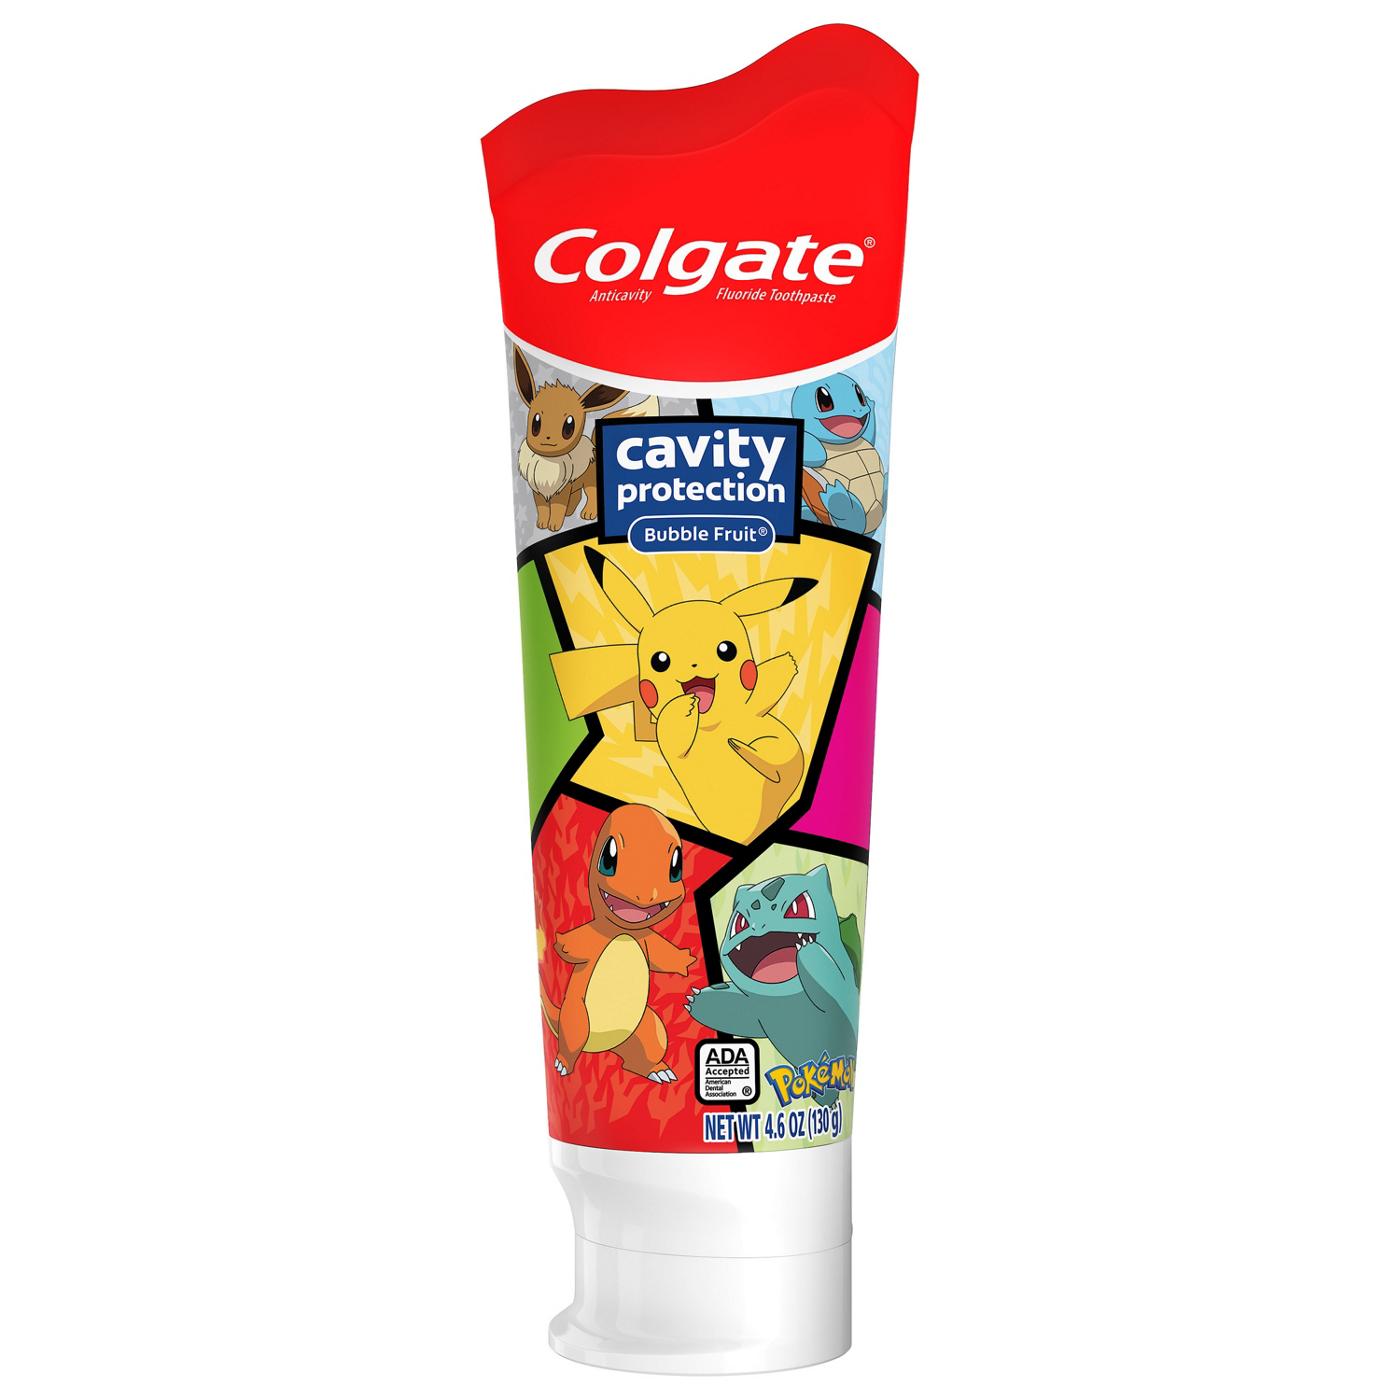 Colgate Kids Cavity Protection Toothpaste - Bubble Fruit; image 1 of 8